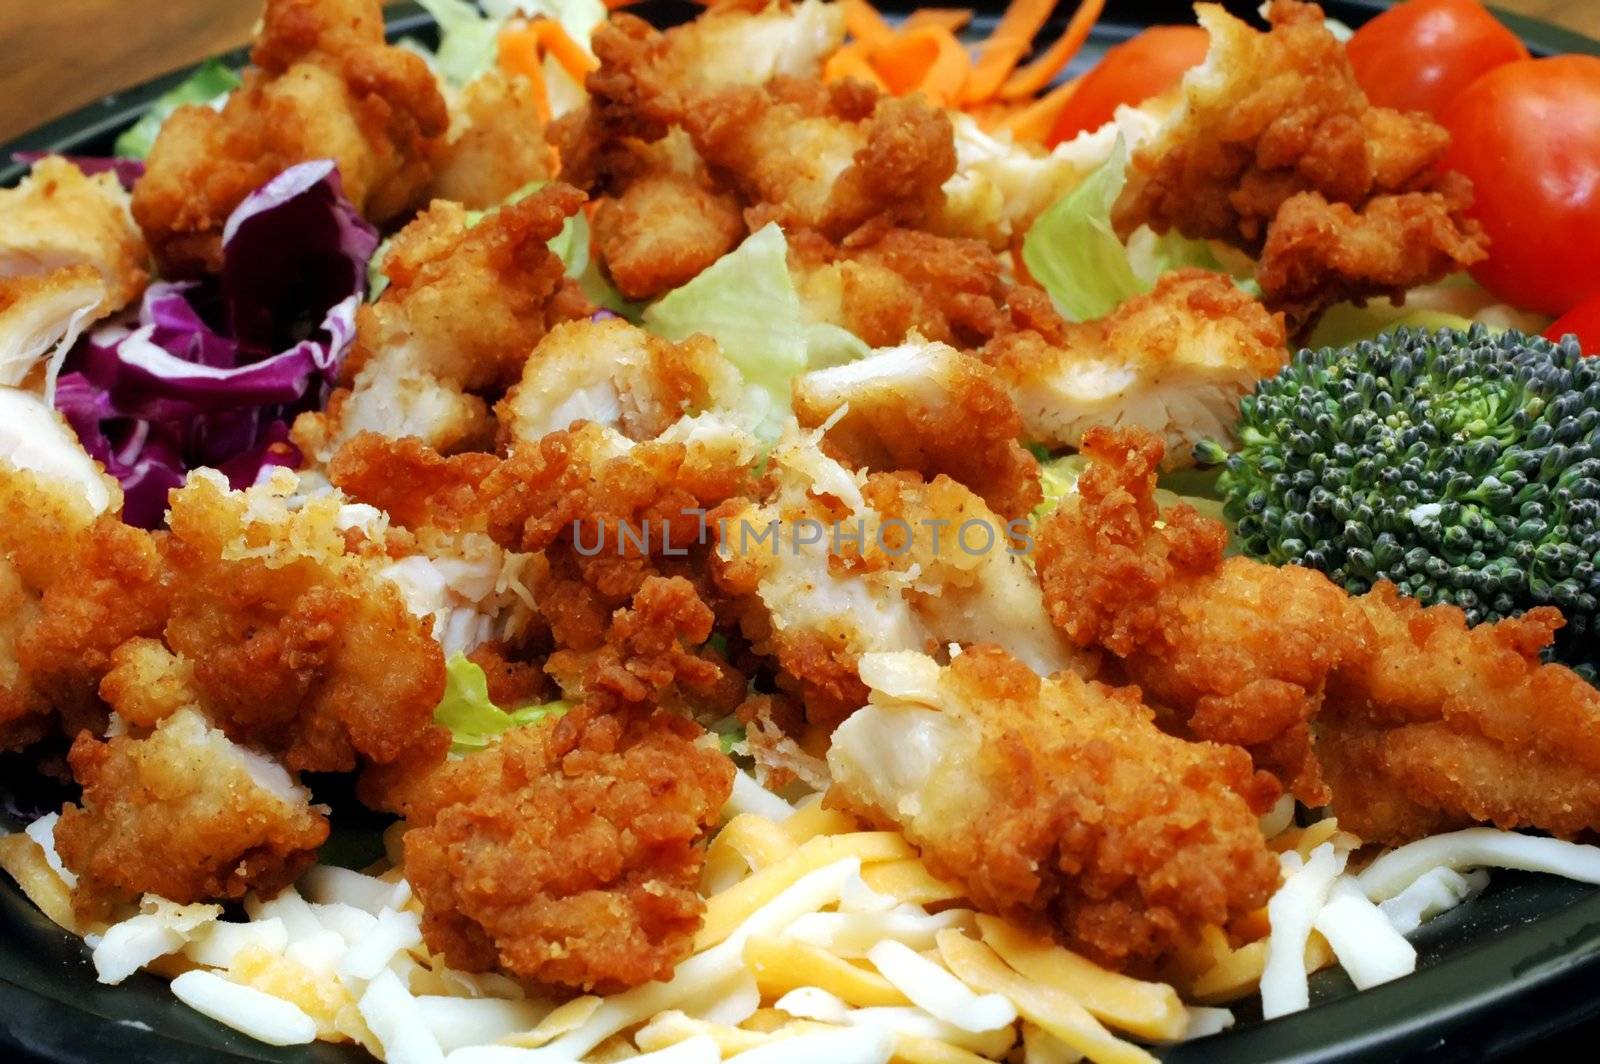 Salad with chopped chicken.